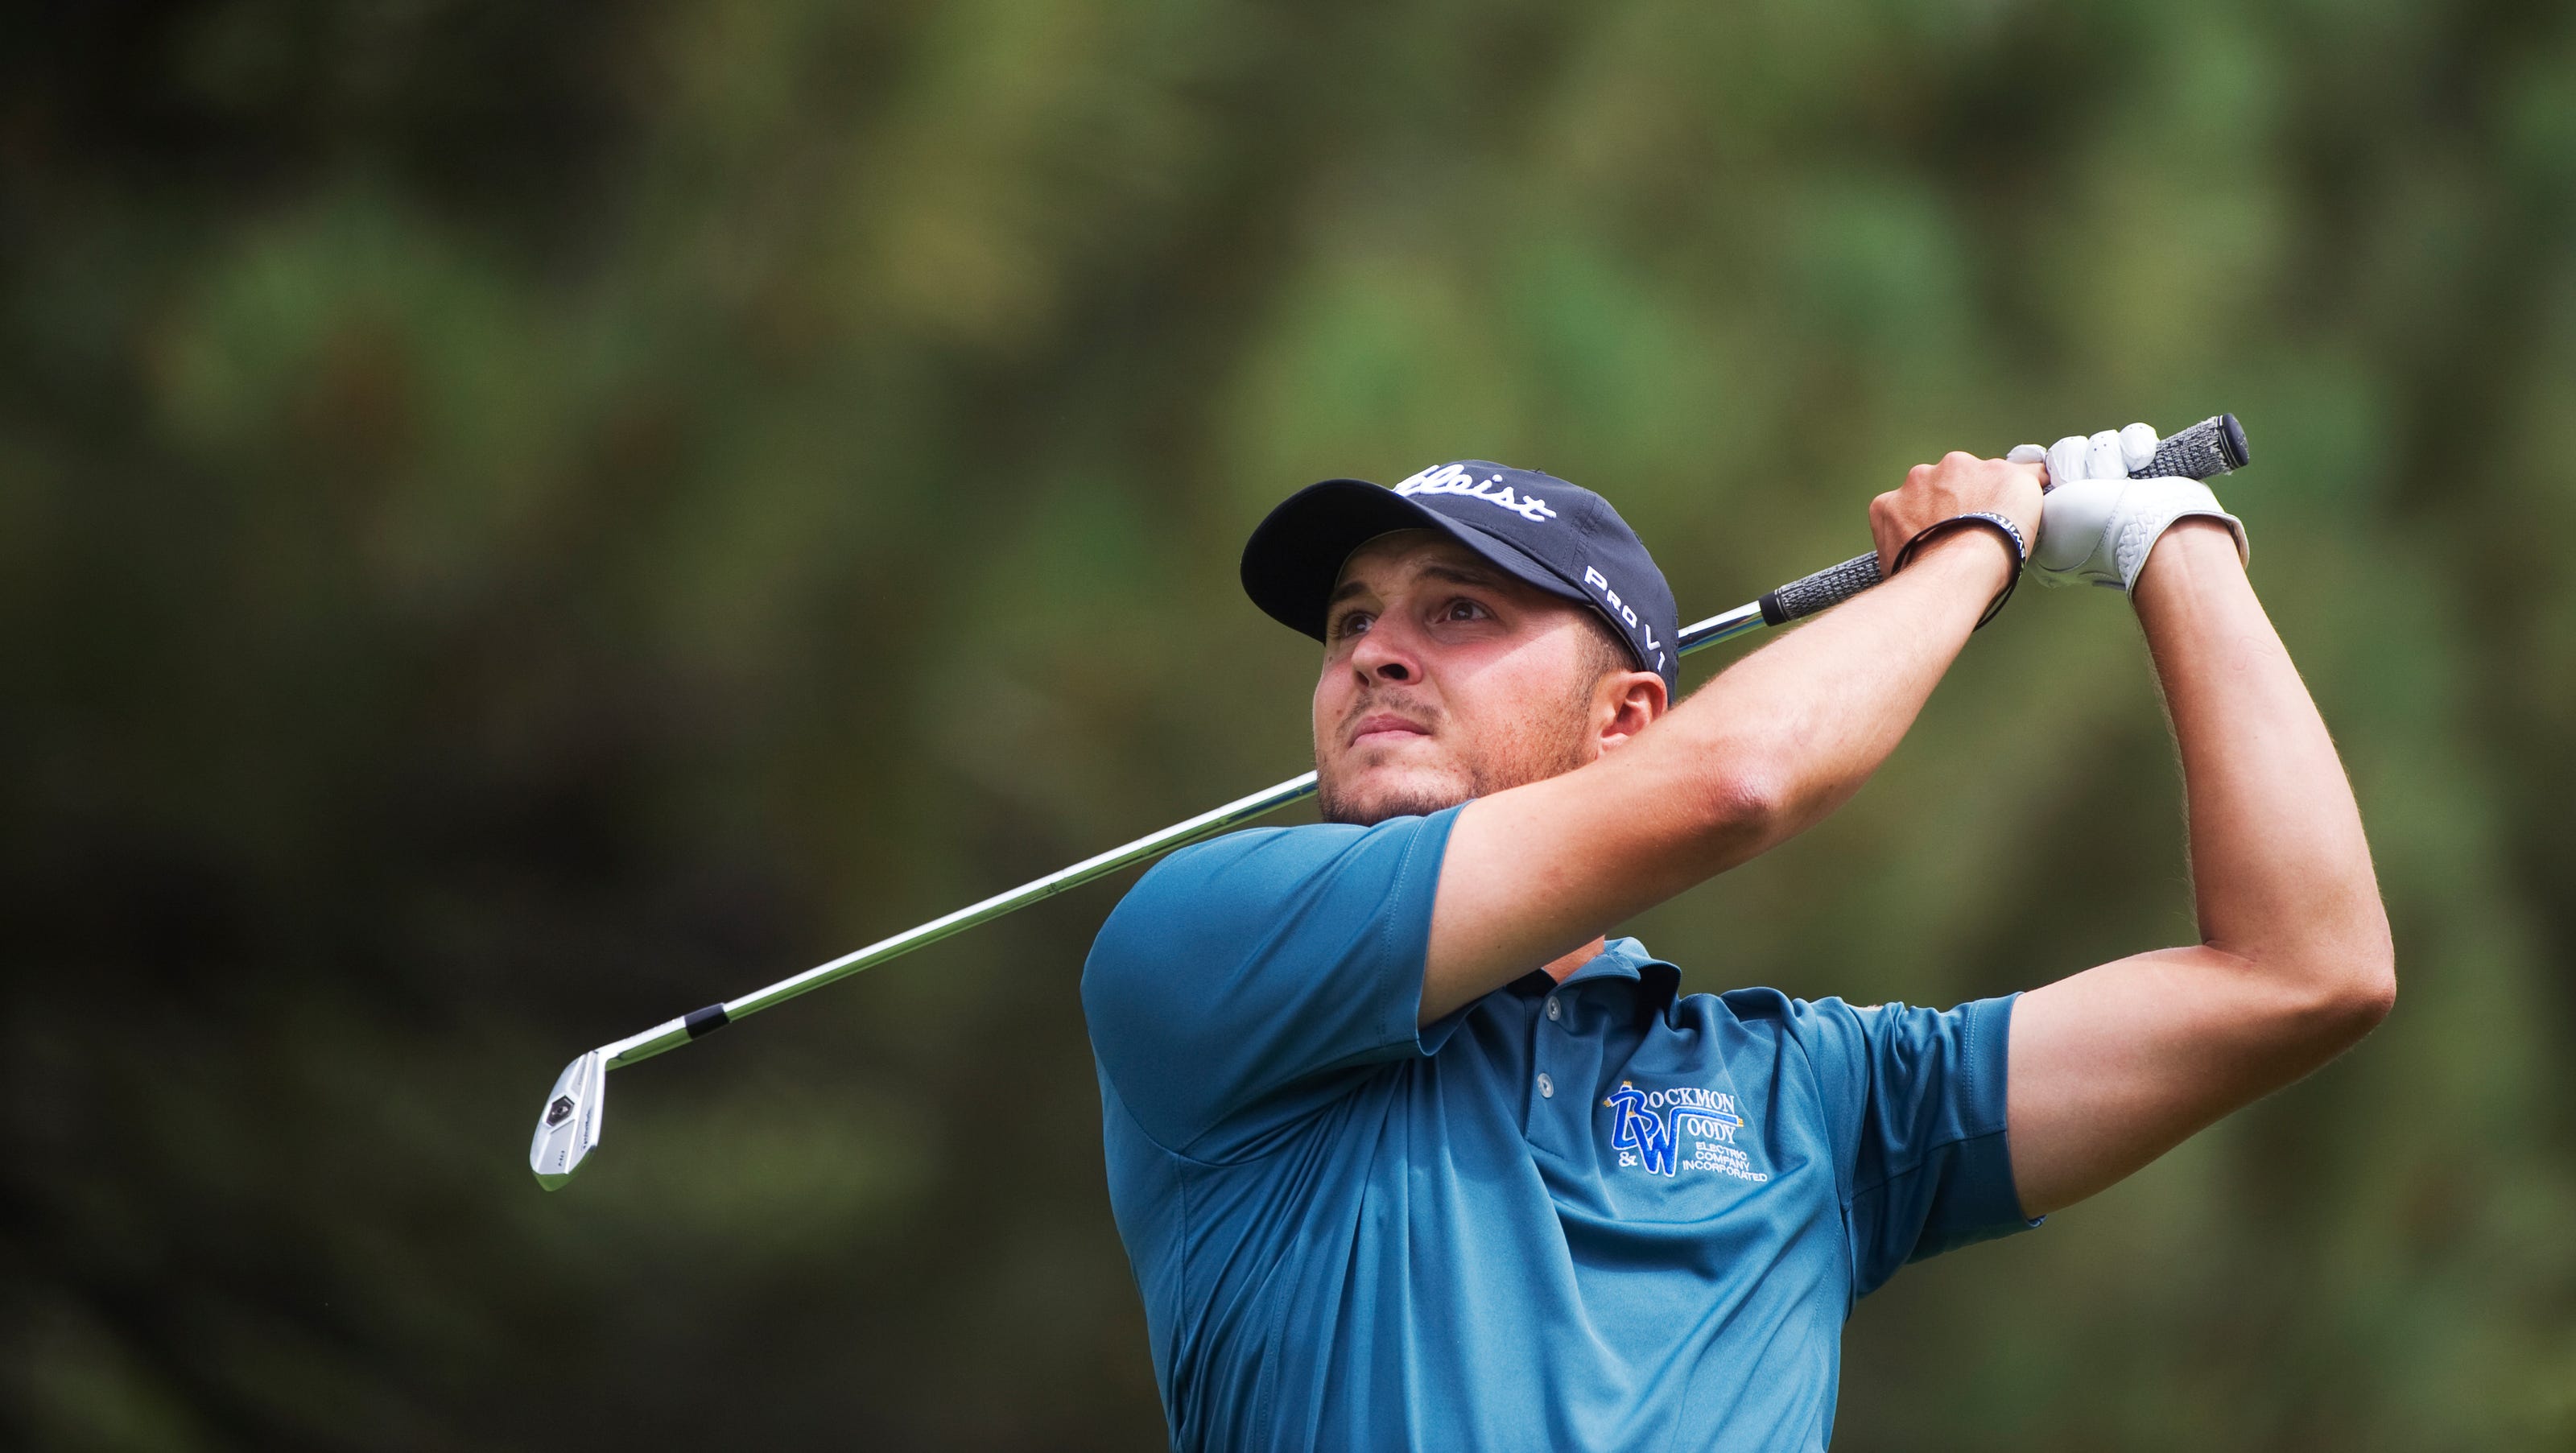 Successful week in the bag for Kevin Lucas at Barracuda